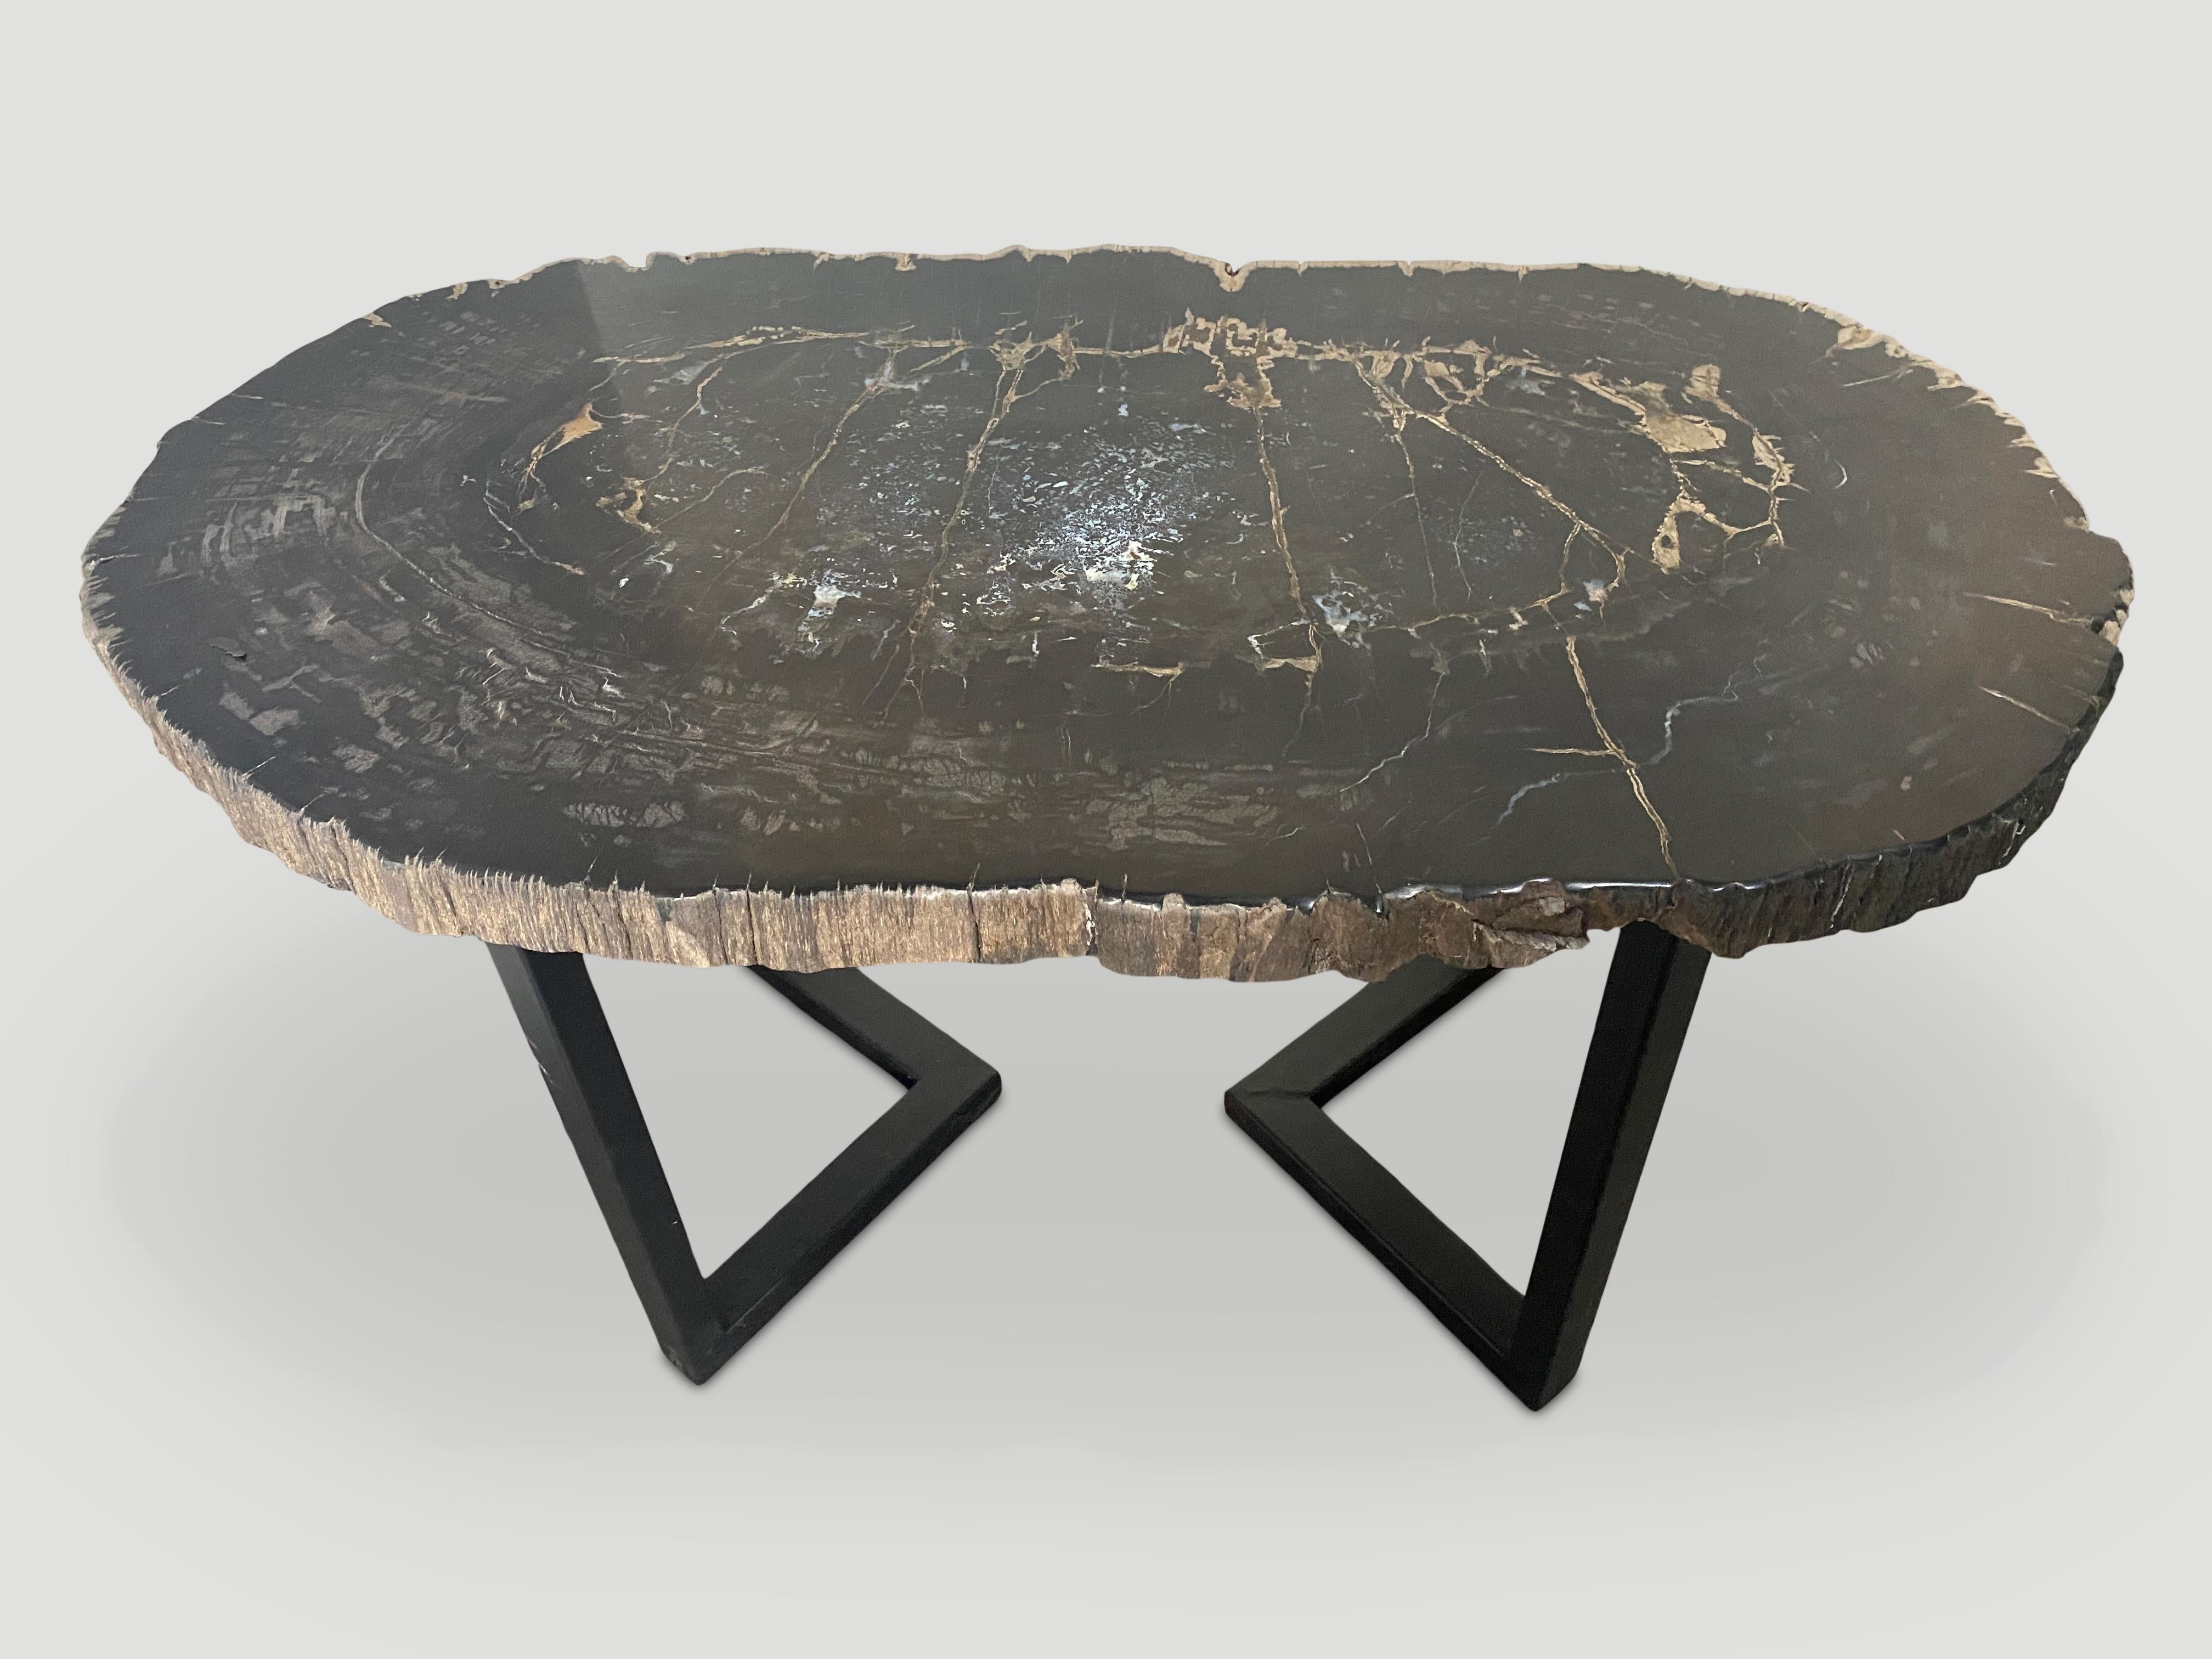 Organic Modern Andrianna Shamaris Magnificent Large Petrified Wood Table For Sale